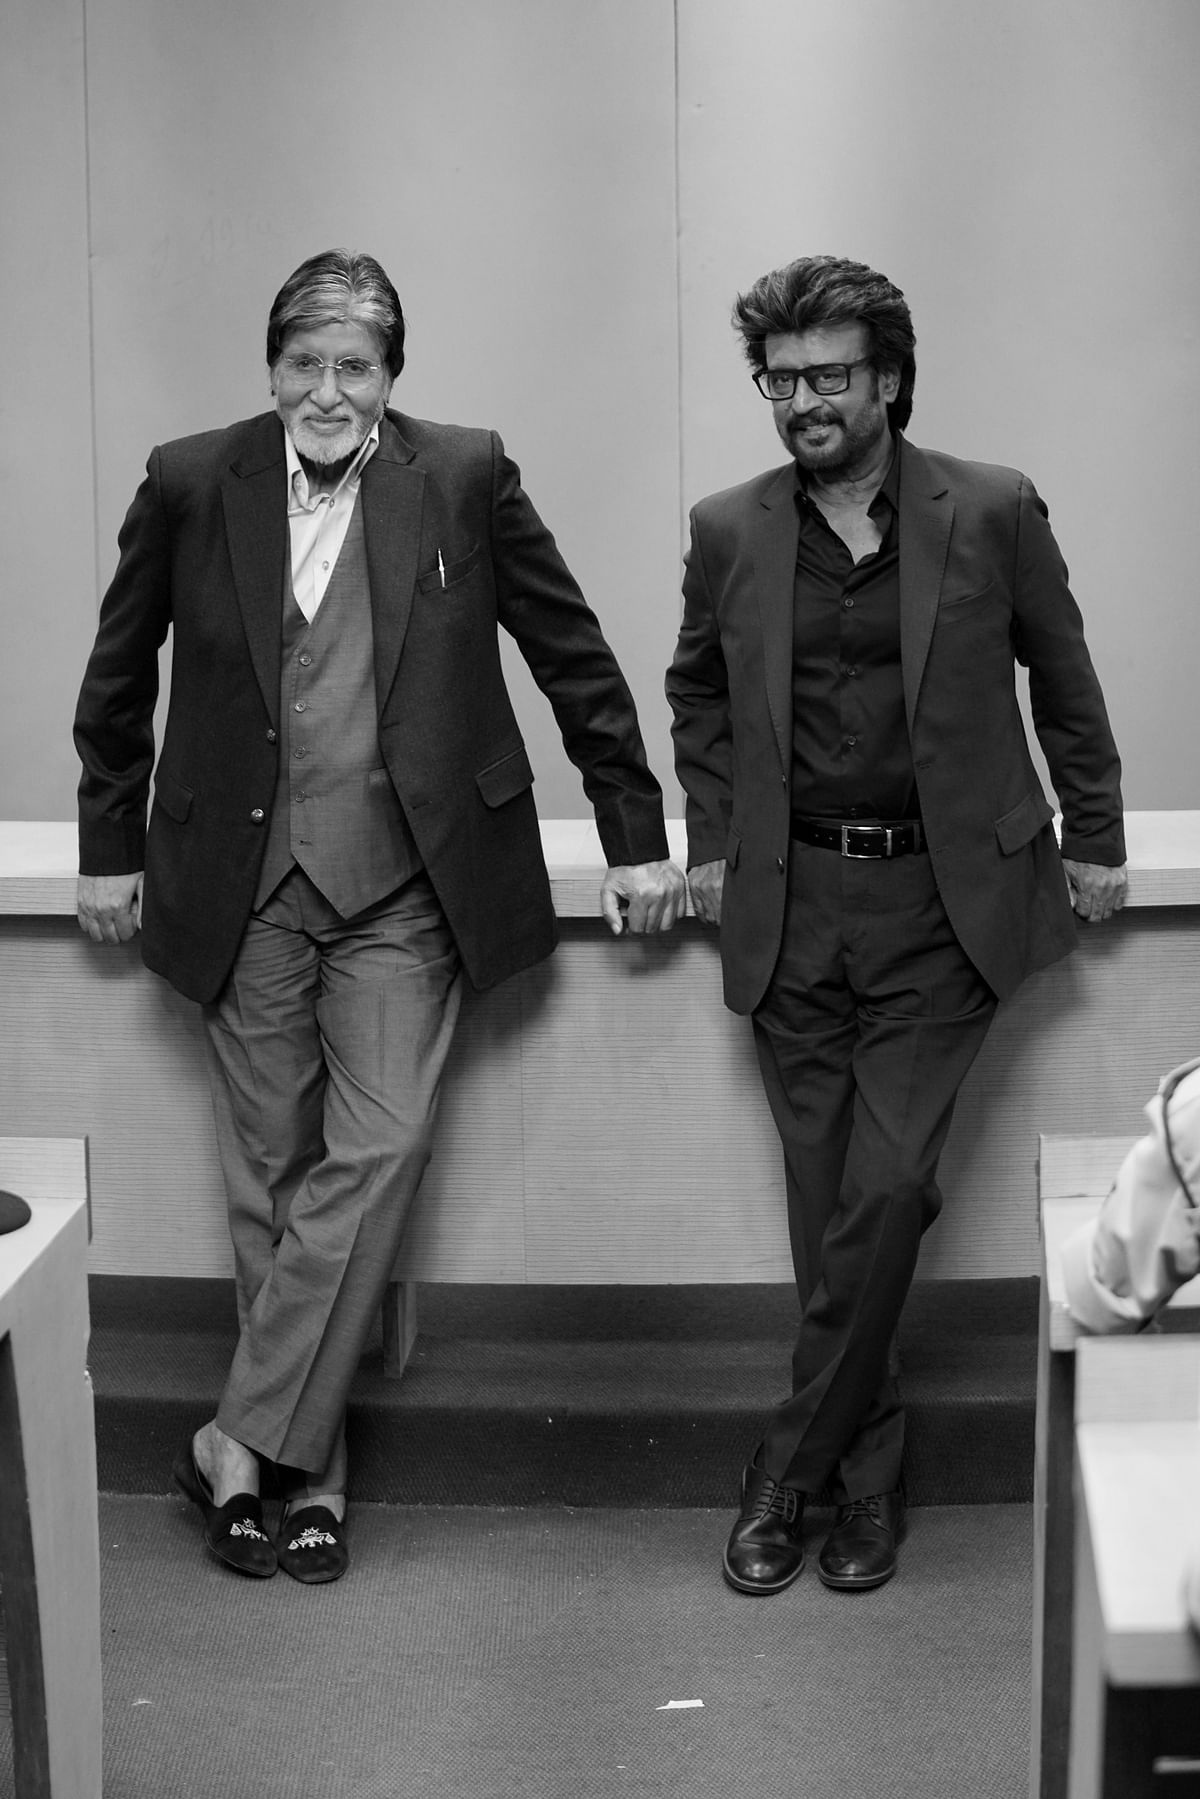 Taking to Instagram on Saturday (4 May) and also on his blog, Big B posted a few photos with Rajinikanth.